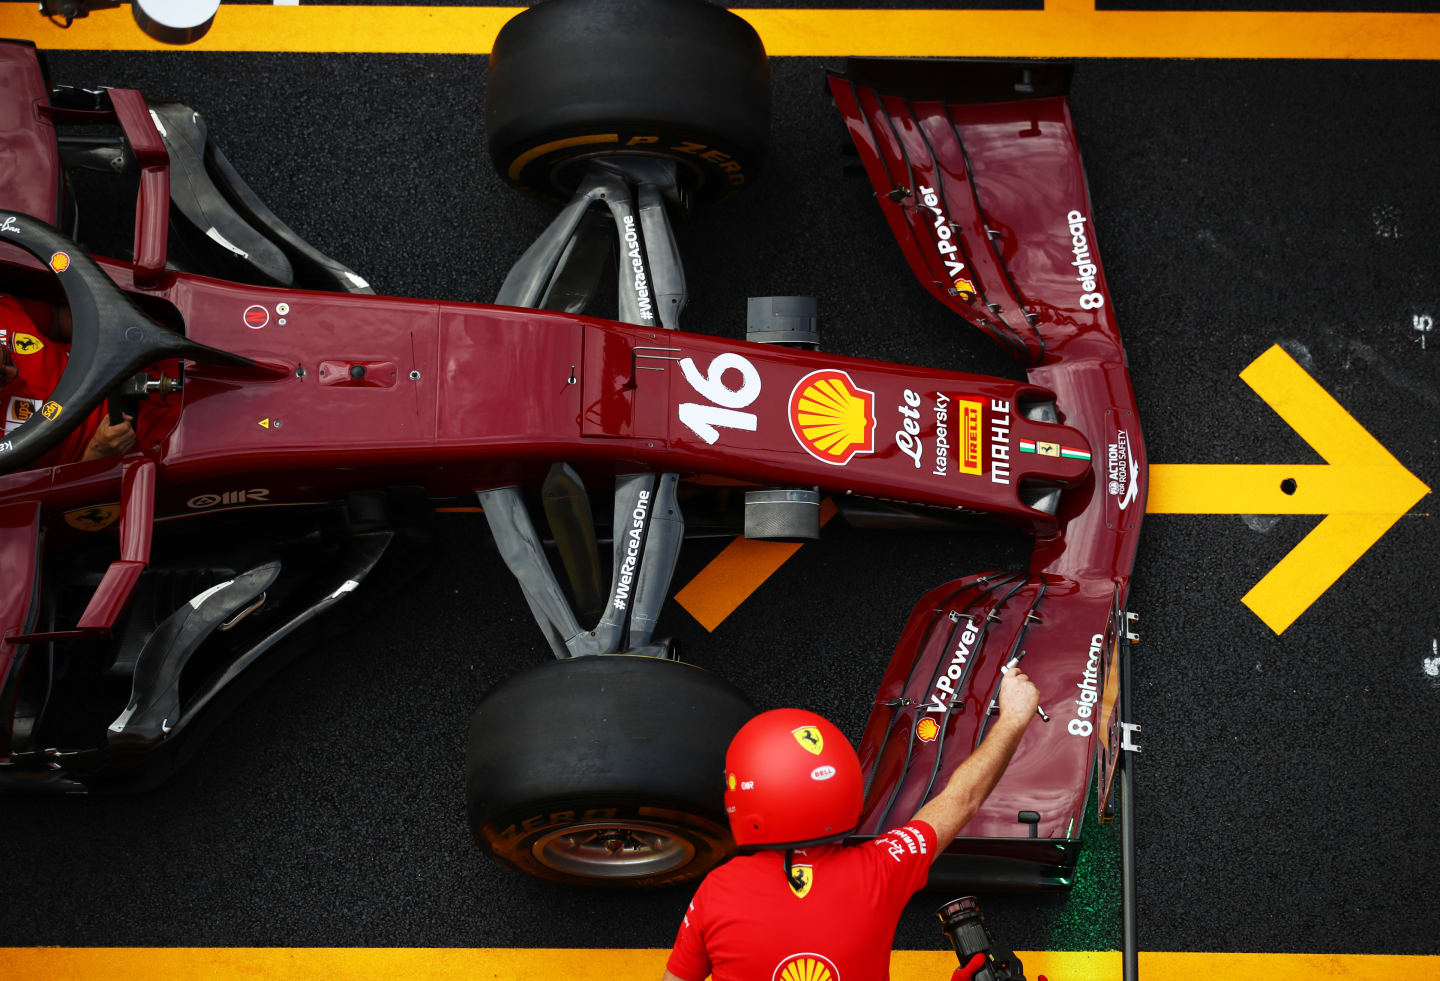 SCARPERIA, ITALY - SEPTEMBER 10: The Ferrari team practice pitstops during previews ahead of the F1